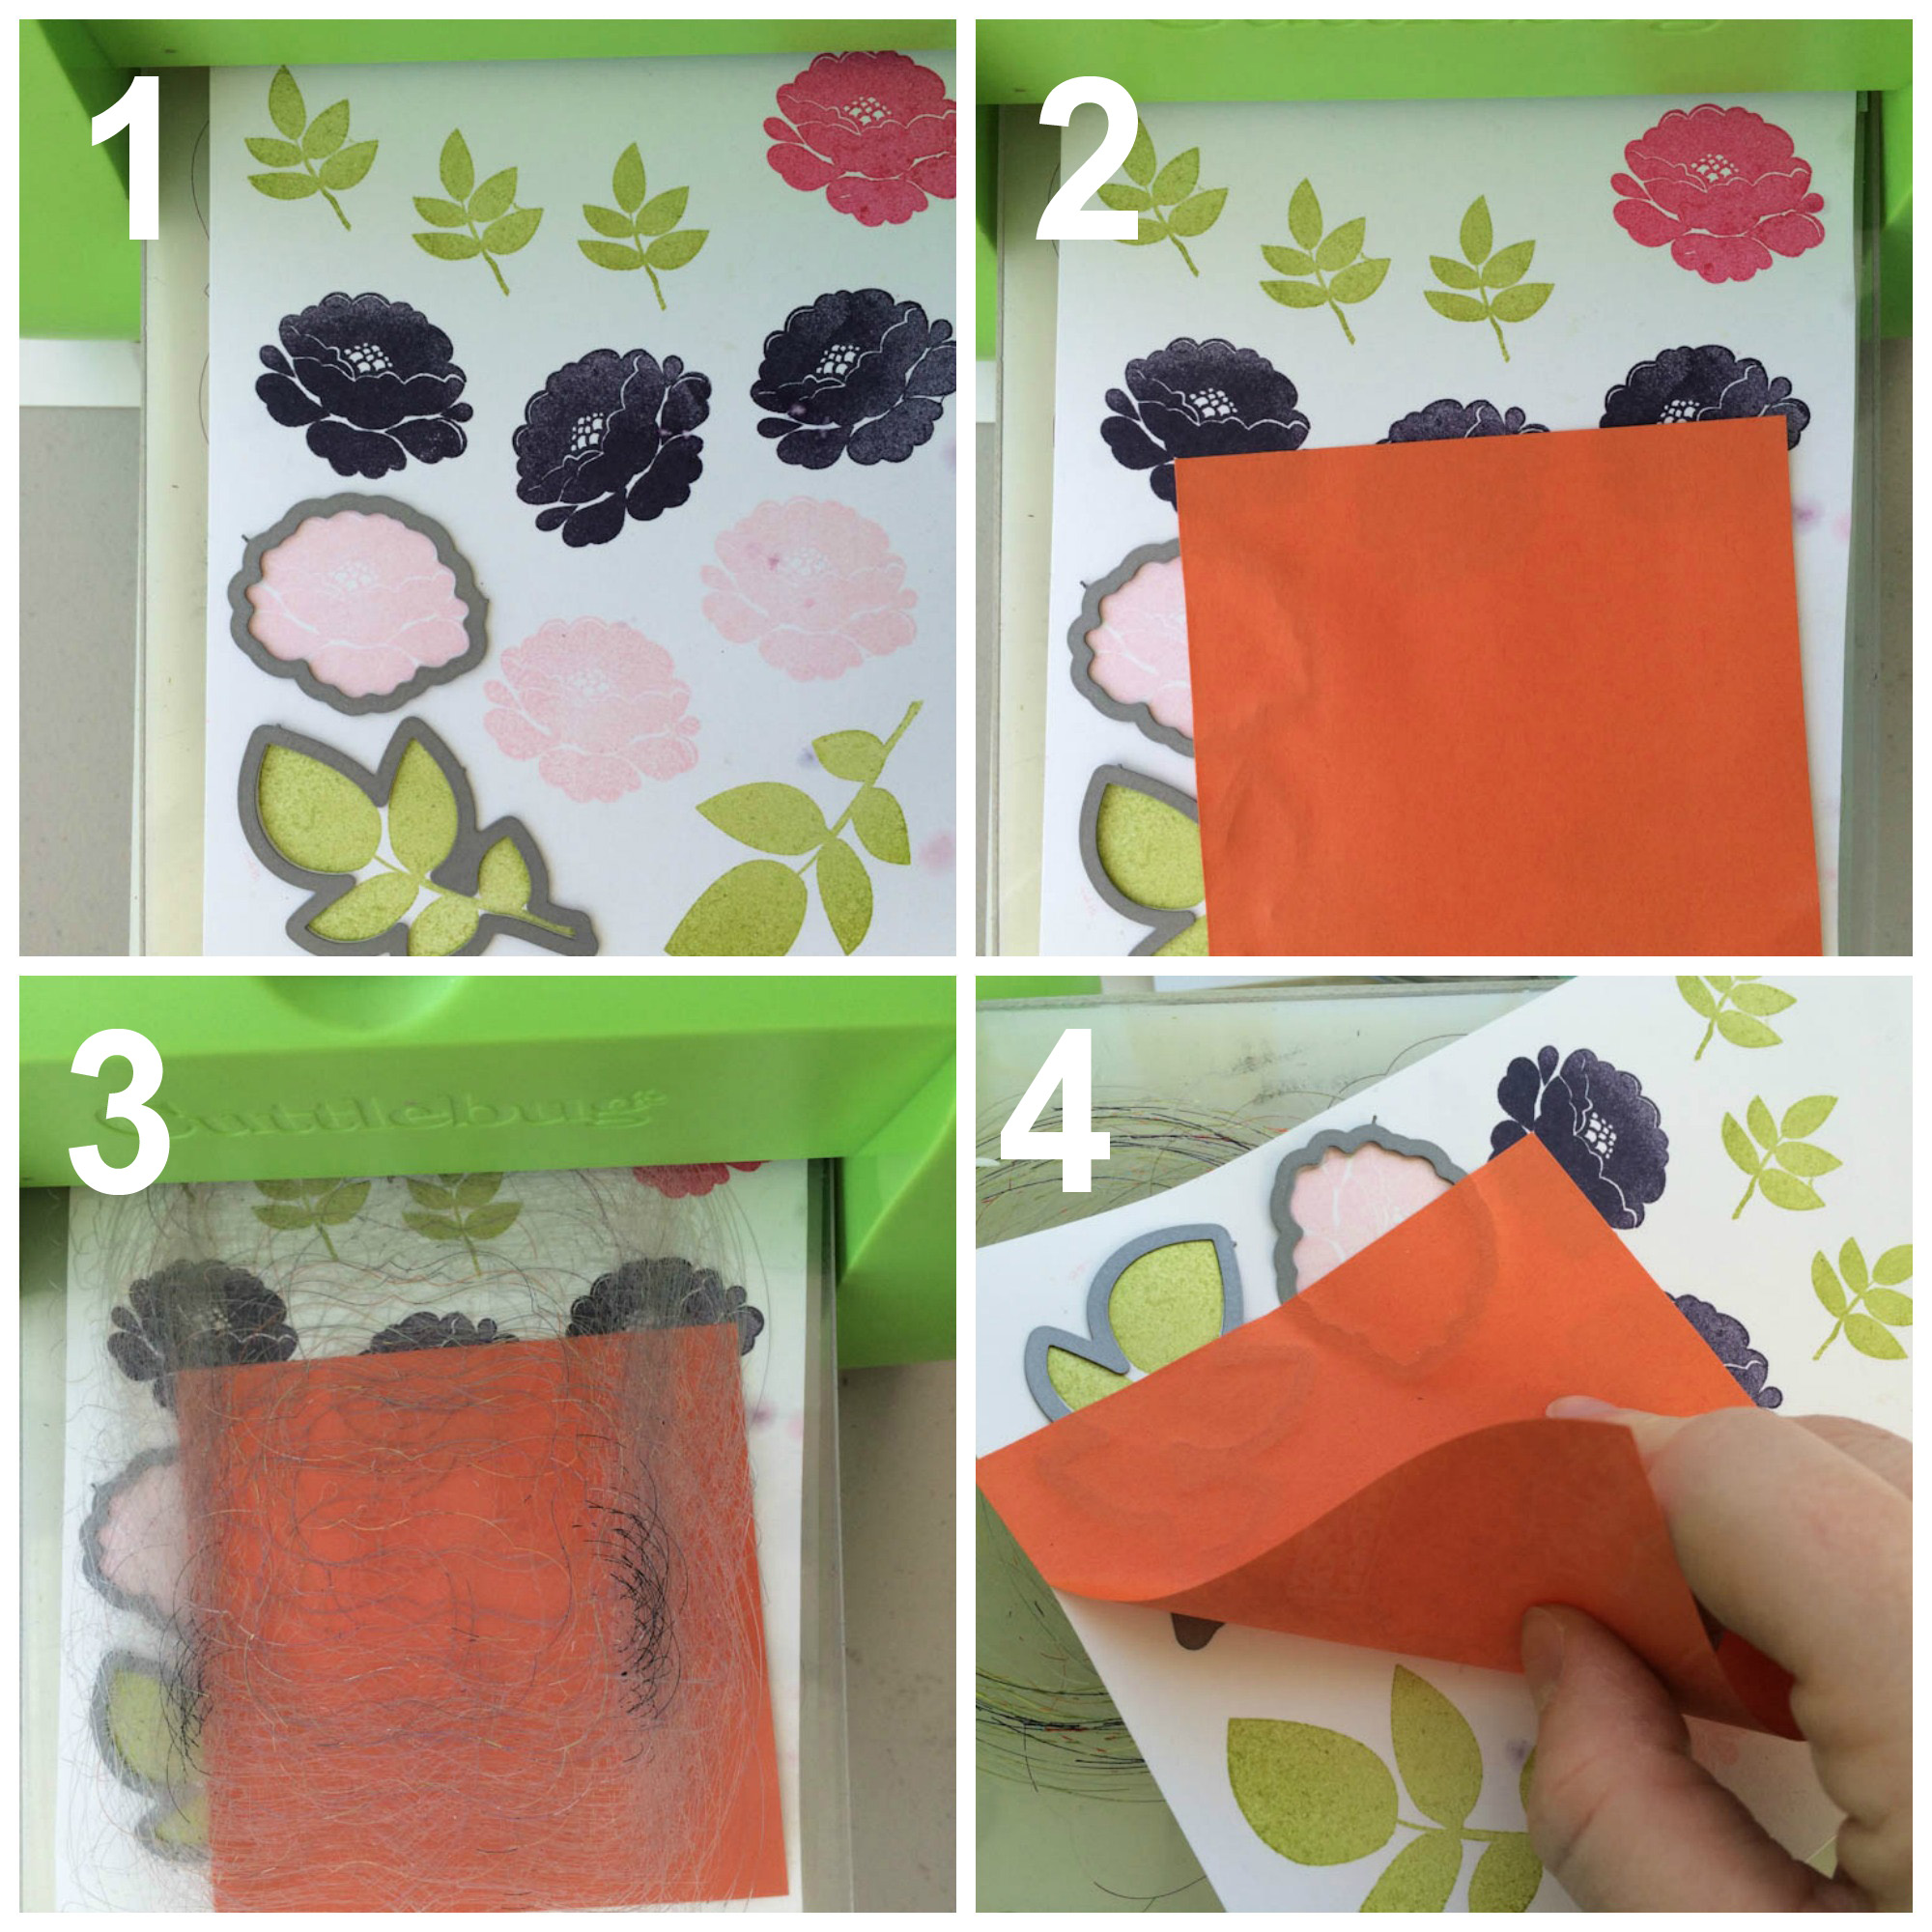 Die Cut Tips - hold manual dies in place with post-its